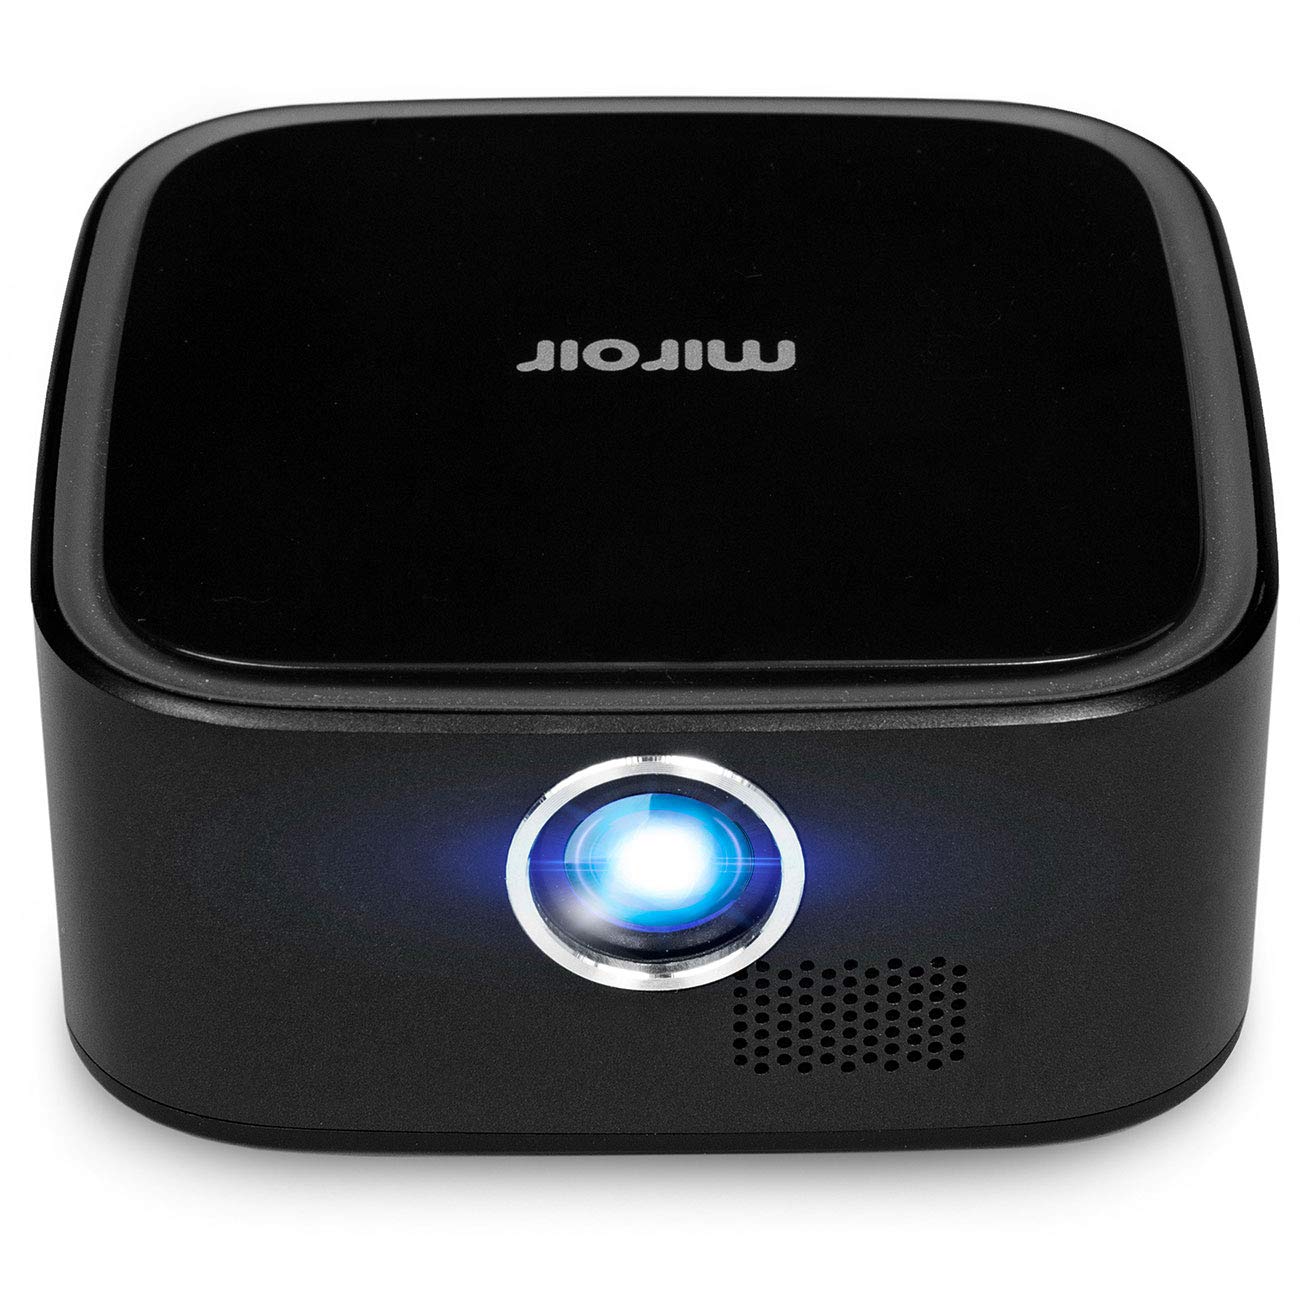 M29 Portable Projector - Rechargeable Battery - Home and Outdoors (Renewed Premium)